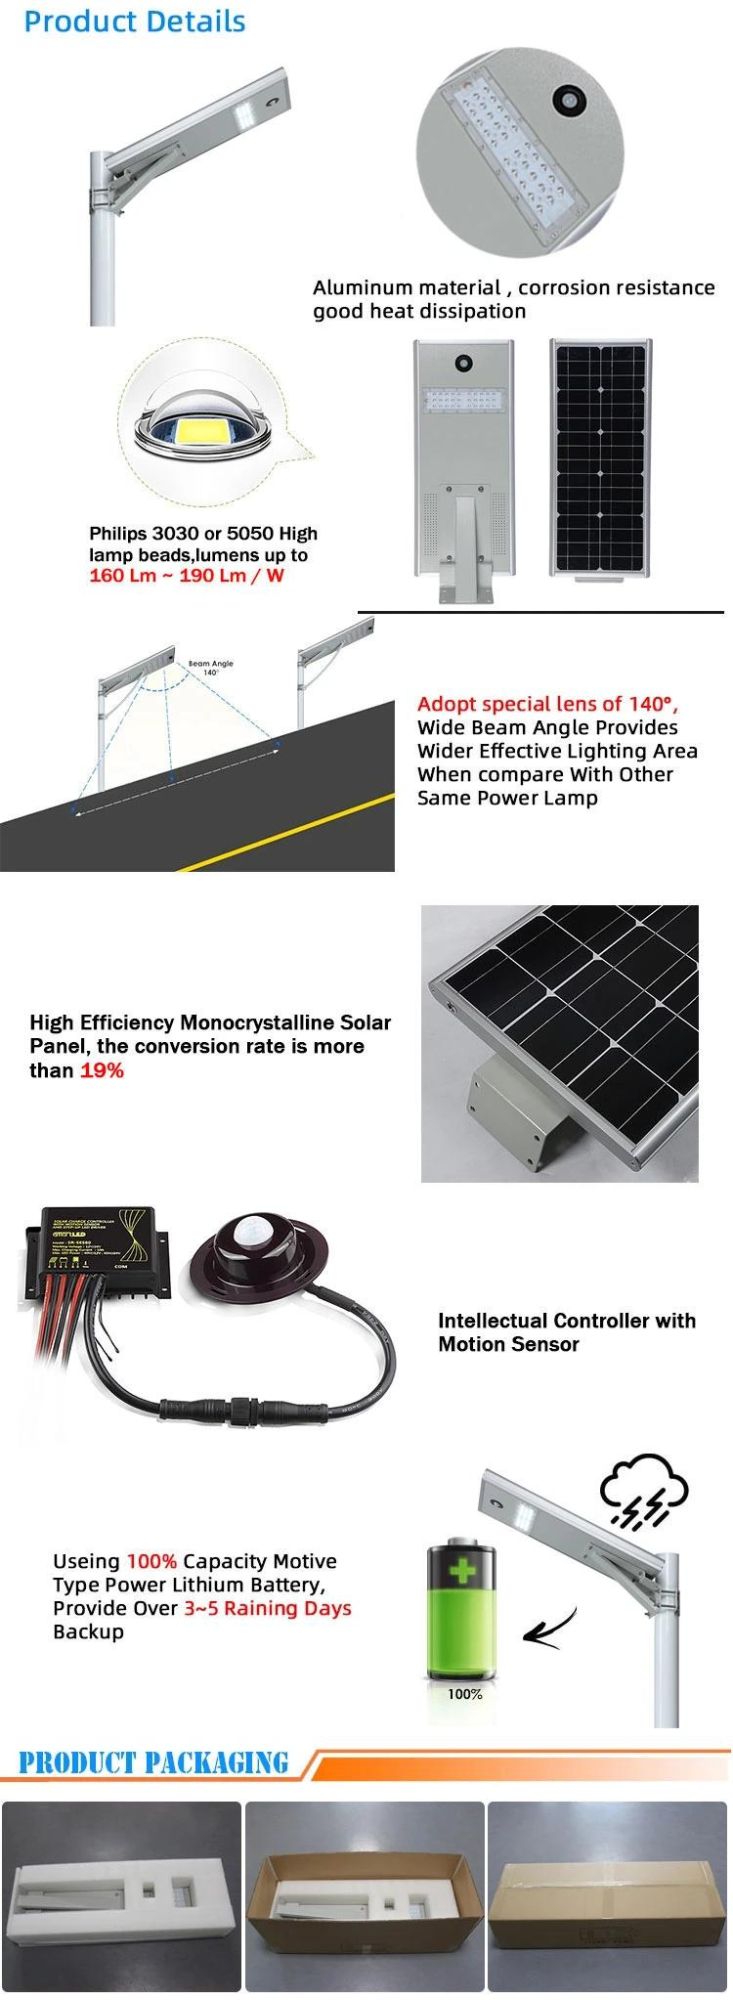 15W All in One Integrated Outdoor IP65 Solar Street Light Factory Directly Sale